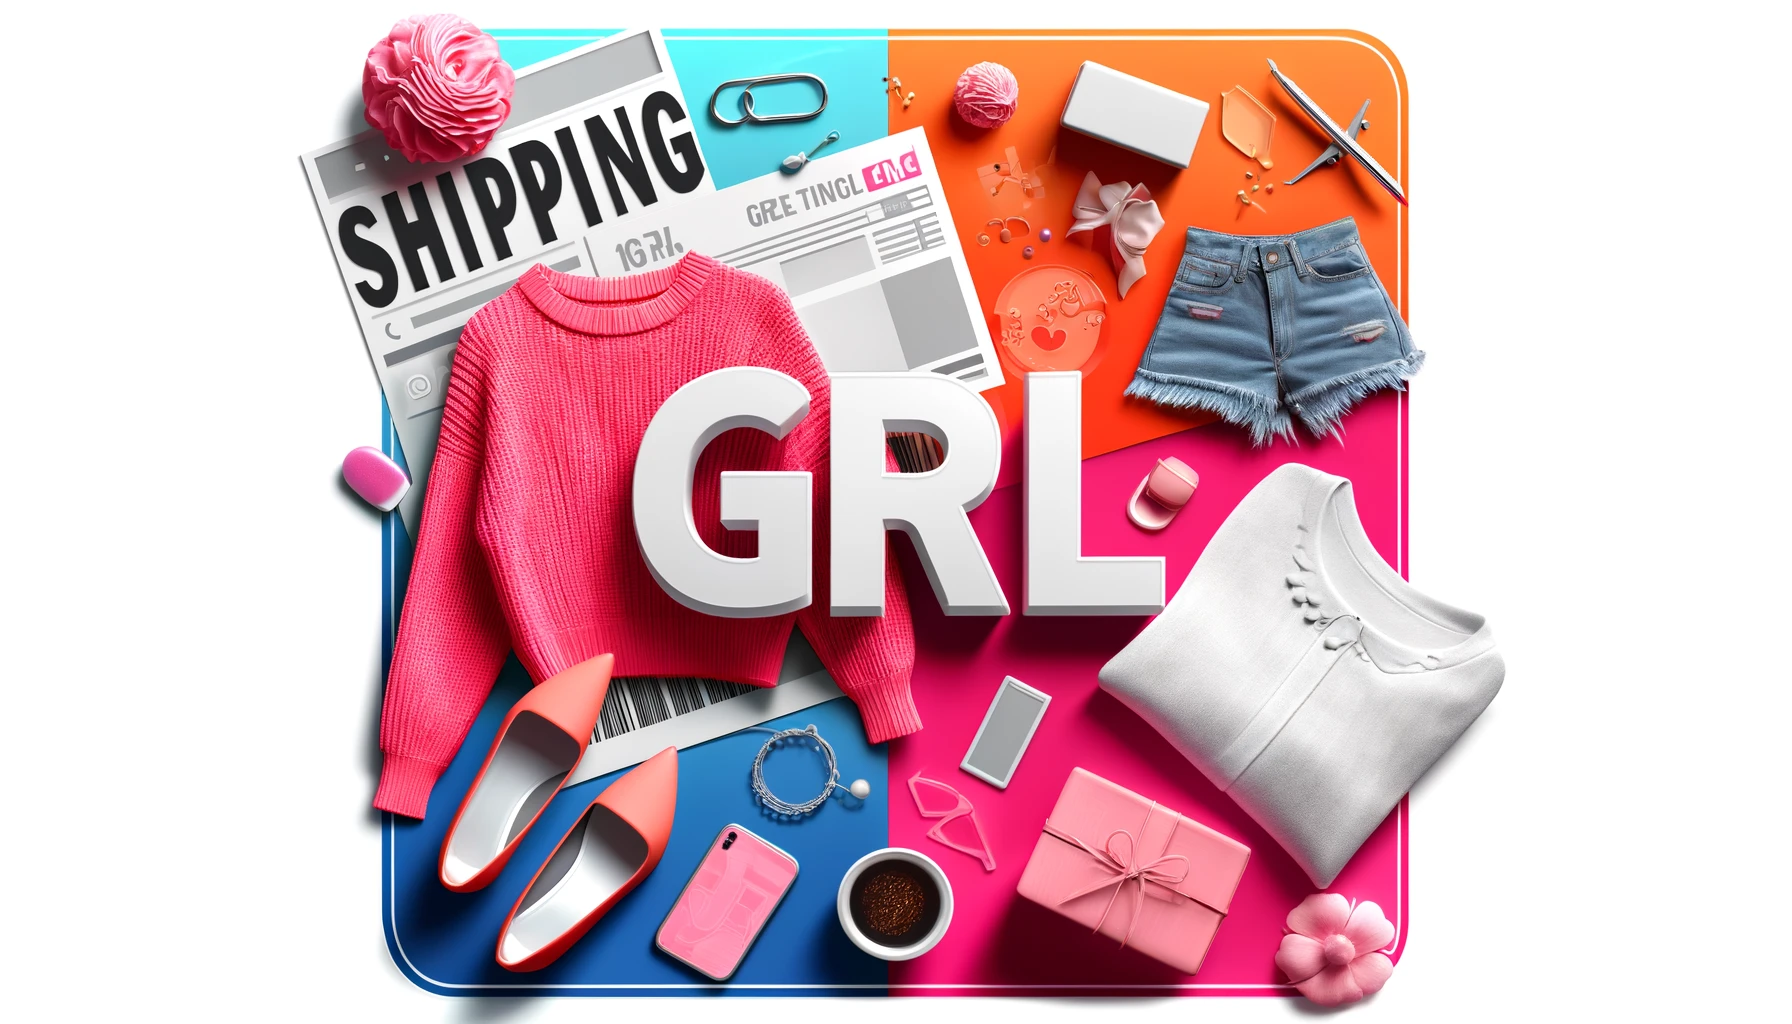 A stylish layout for a fashion brand named 'GRL' with a focus on shipping. The image features trendy and affordable clothing items displayed attractively. Incorporate the word 'GRL' prominently in the design. The background should be vibrant and fashionable, reflecting the brand's appeal to young women. The image should be in a 16:9 aspect ratio.